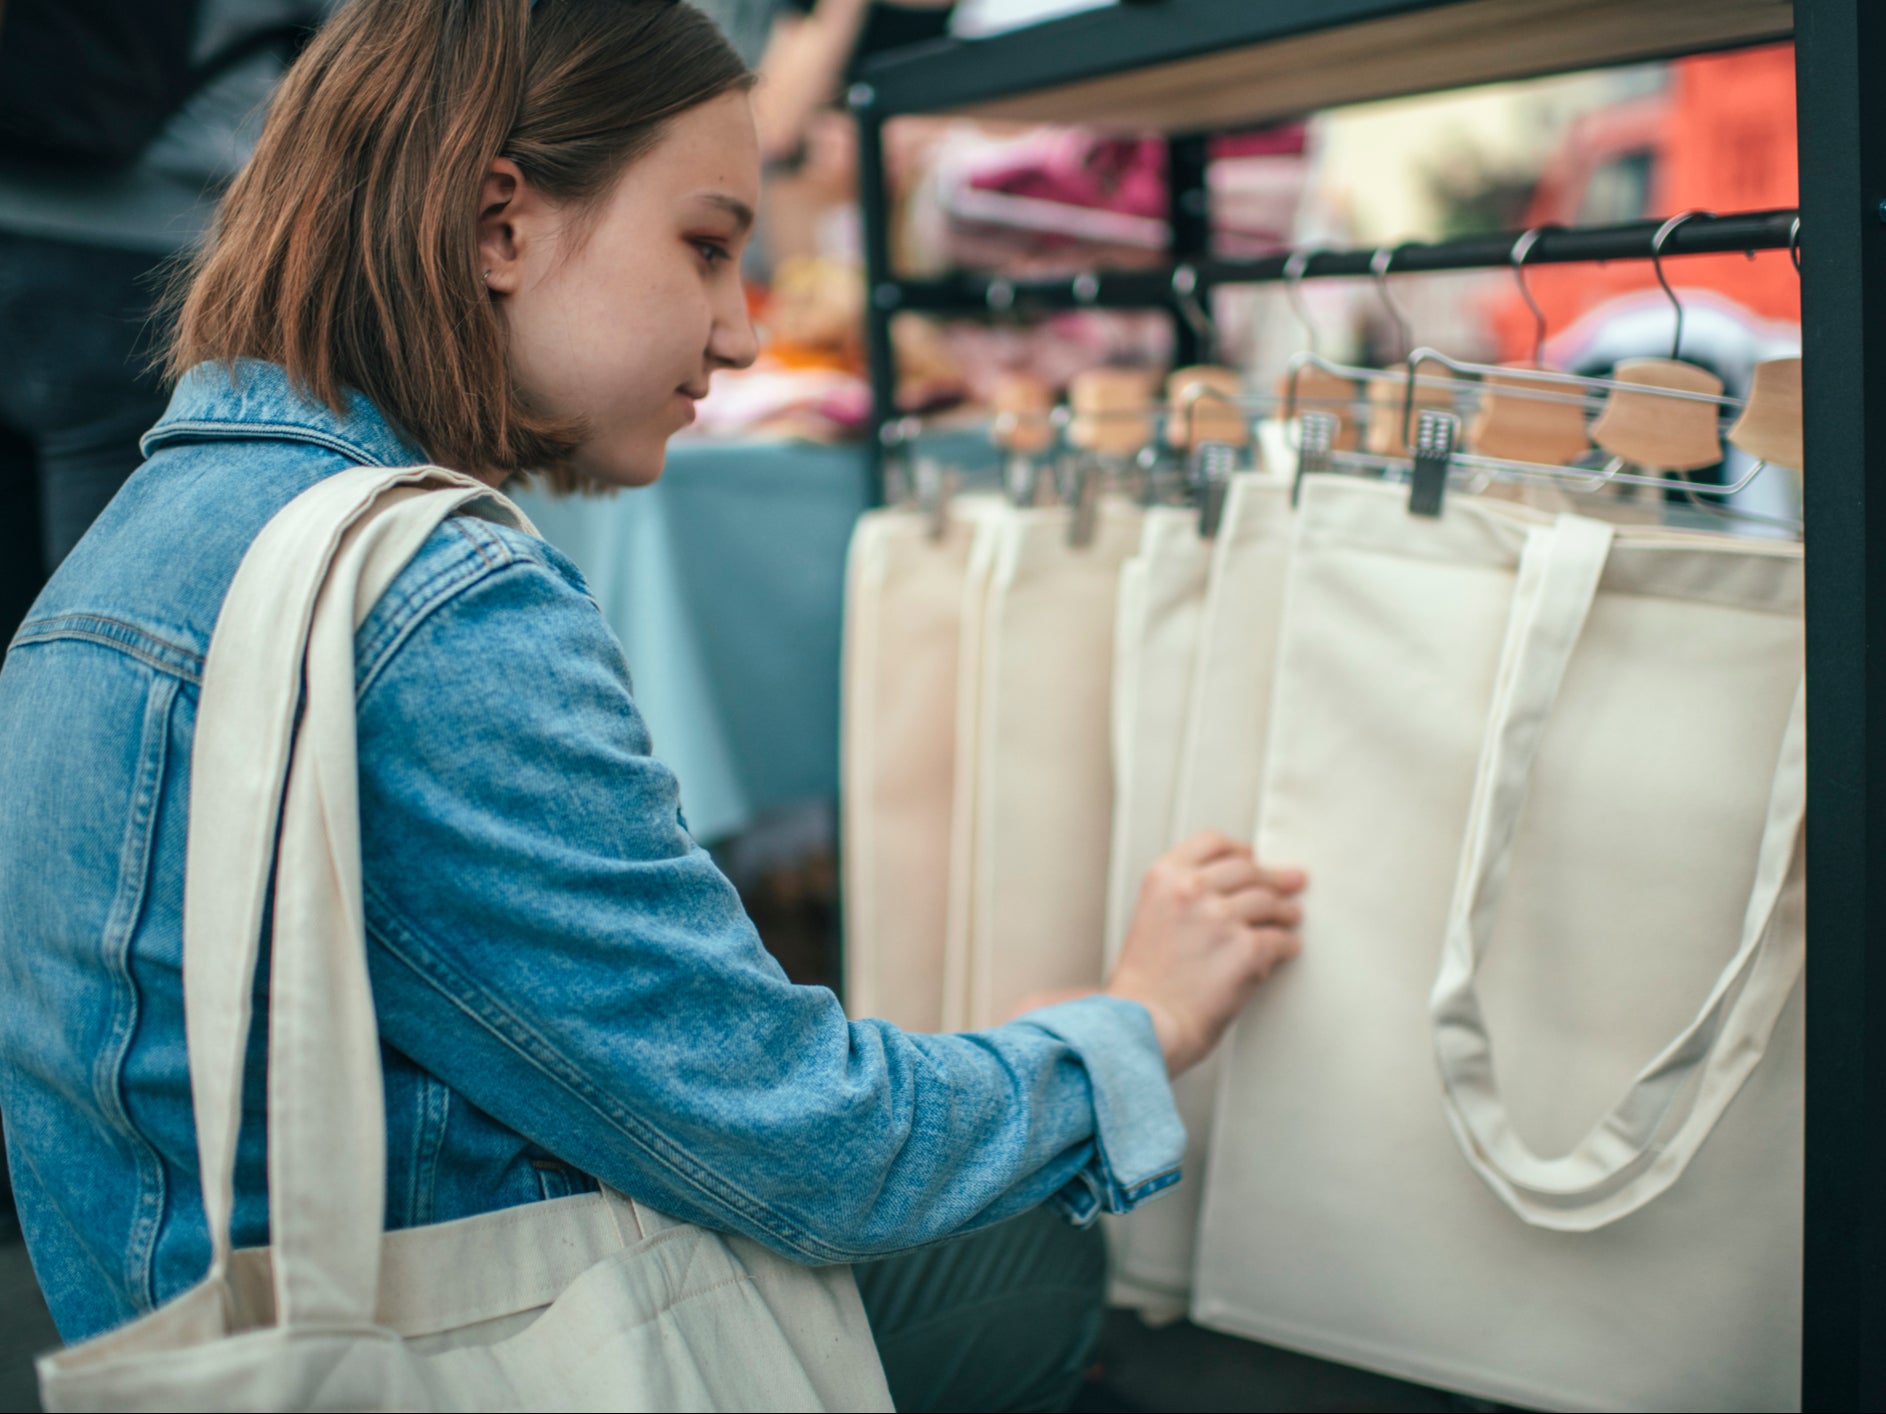 Cotton tote bags not environmentally-friendly due to